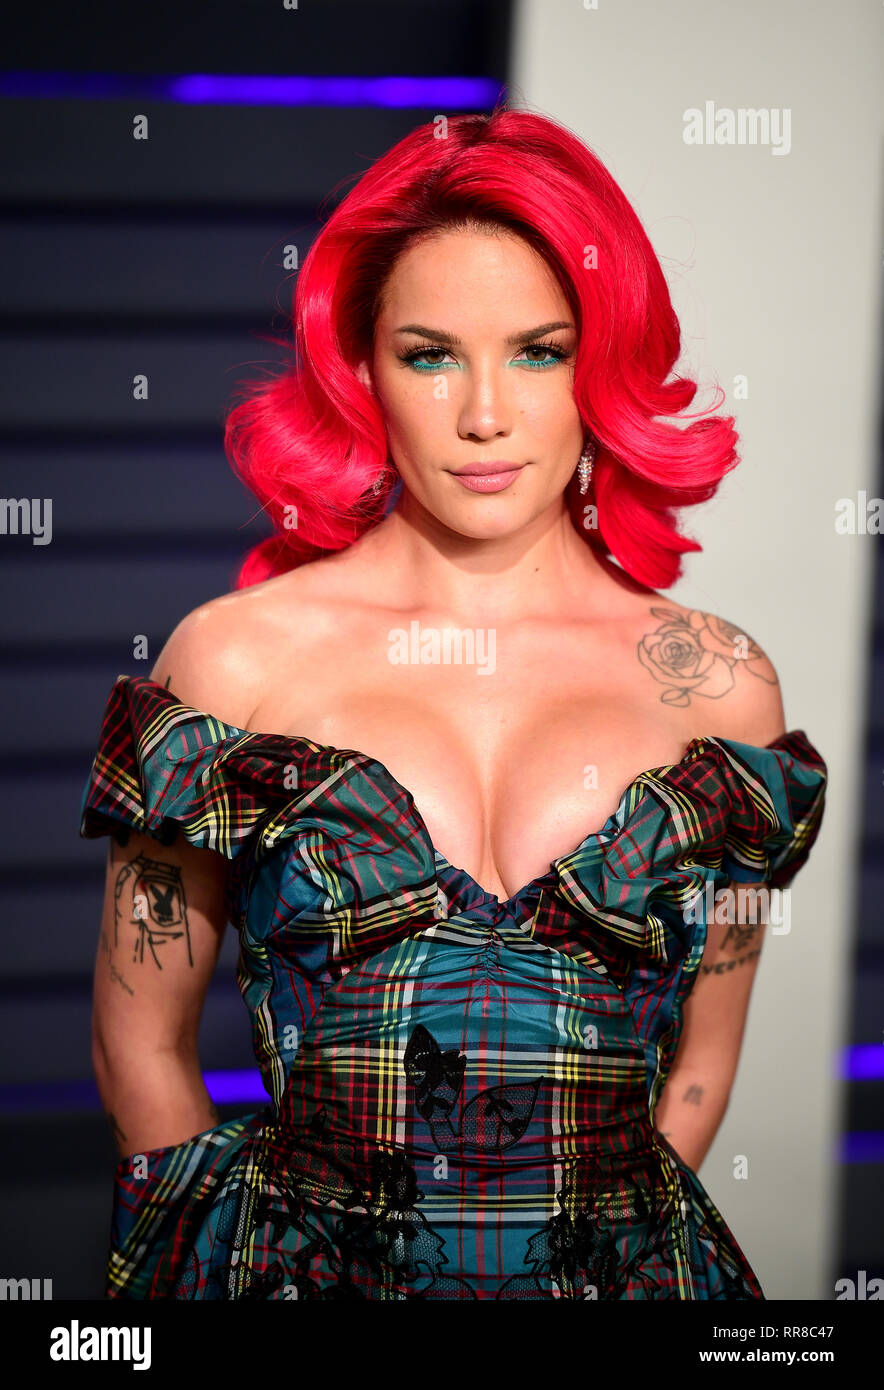 Halsey attending the Vanity Fair Oscar Party held at the Wallis Annenberg Center for the Performing Arts in Beverly Hills, Los Angeles, California, USA. Stock Photo